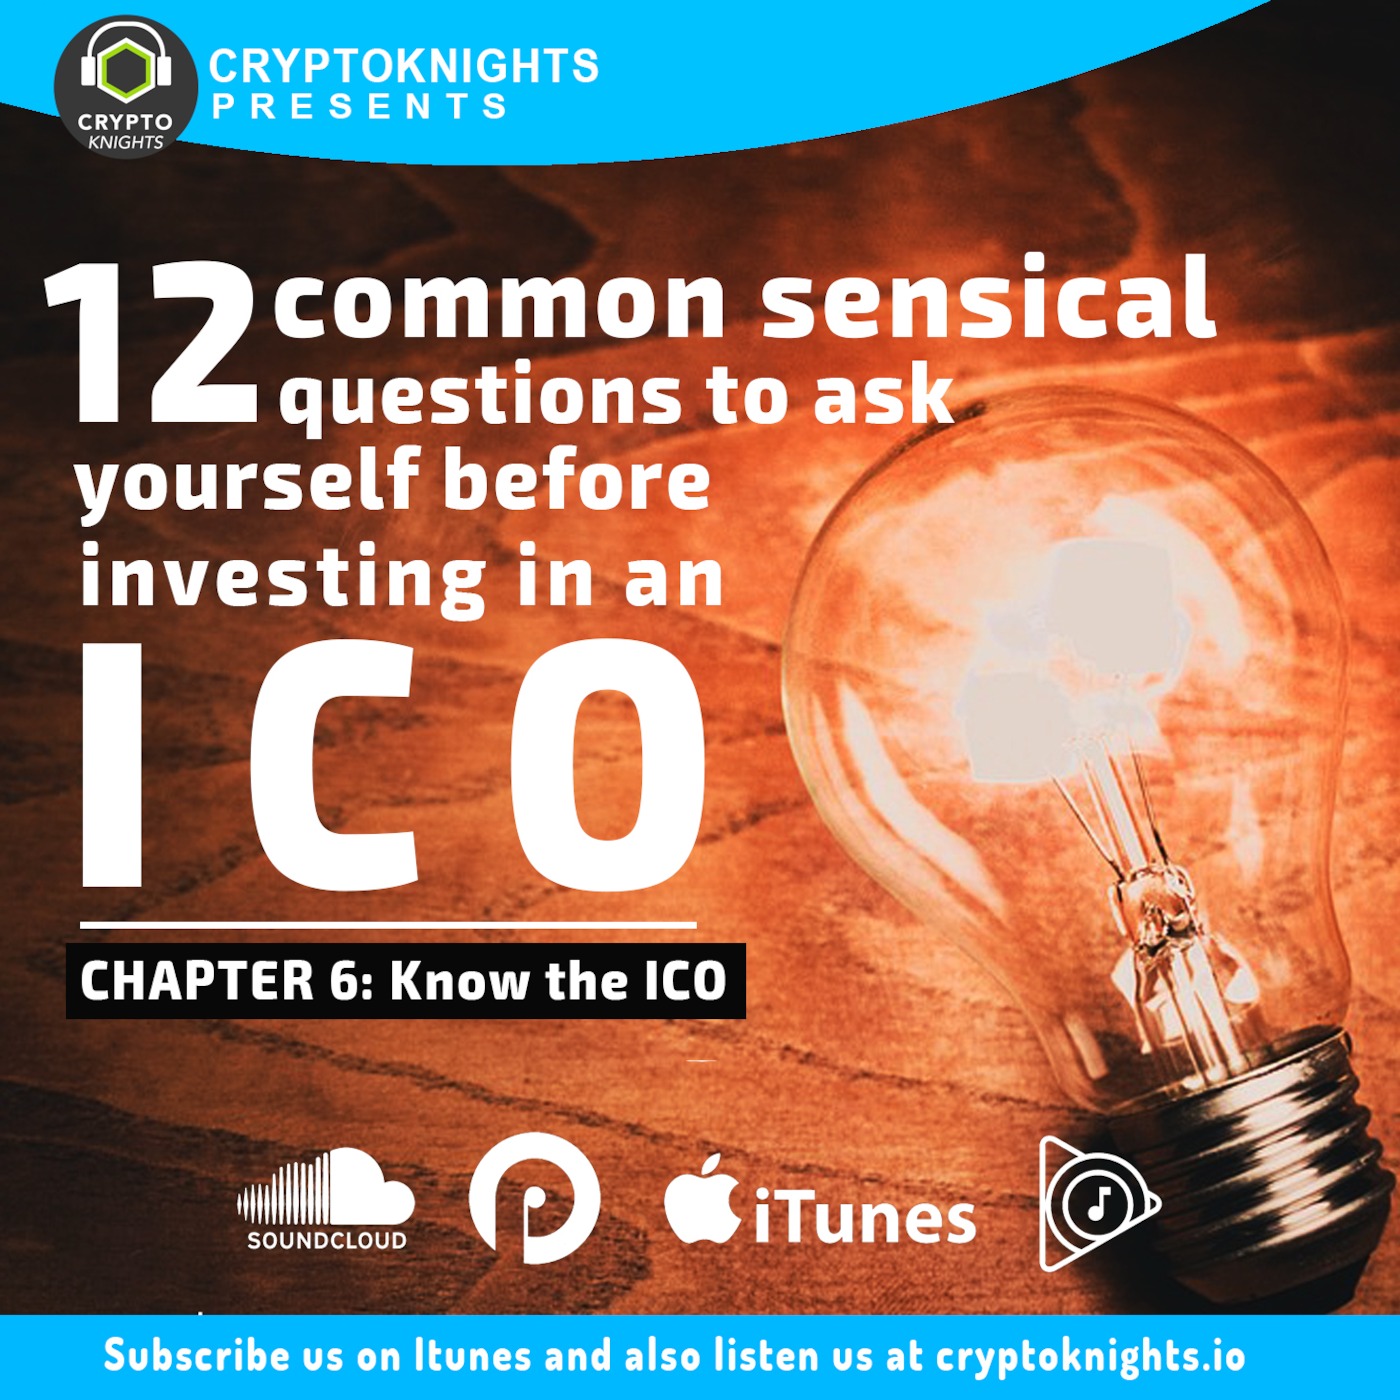 12 common sensical questions to ask yourself before investing in an ICO. Chapter:6 Know the ICO